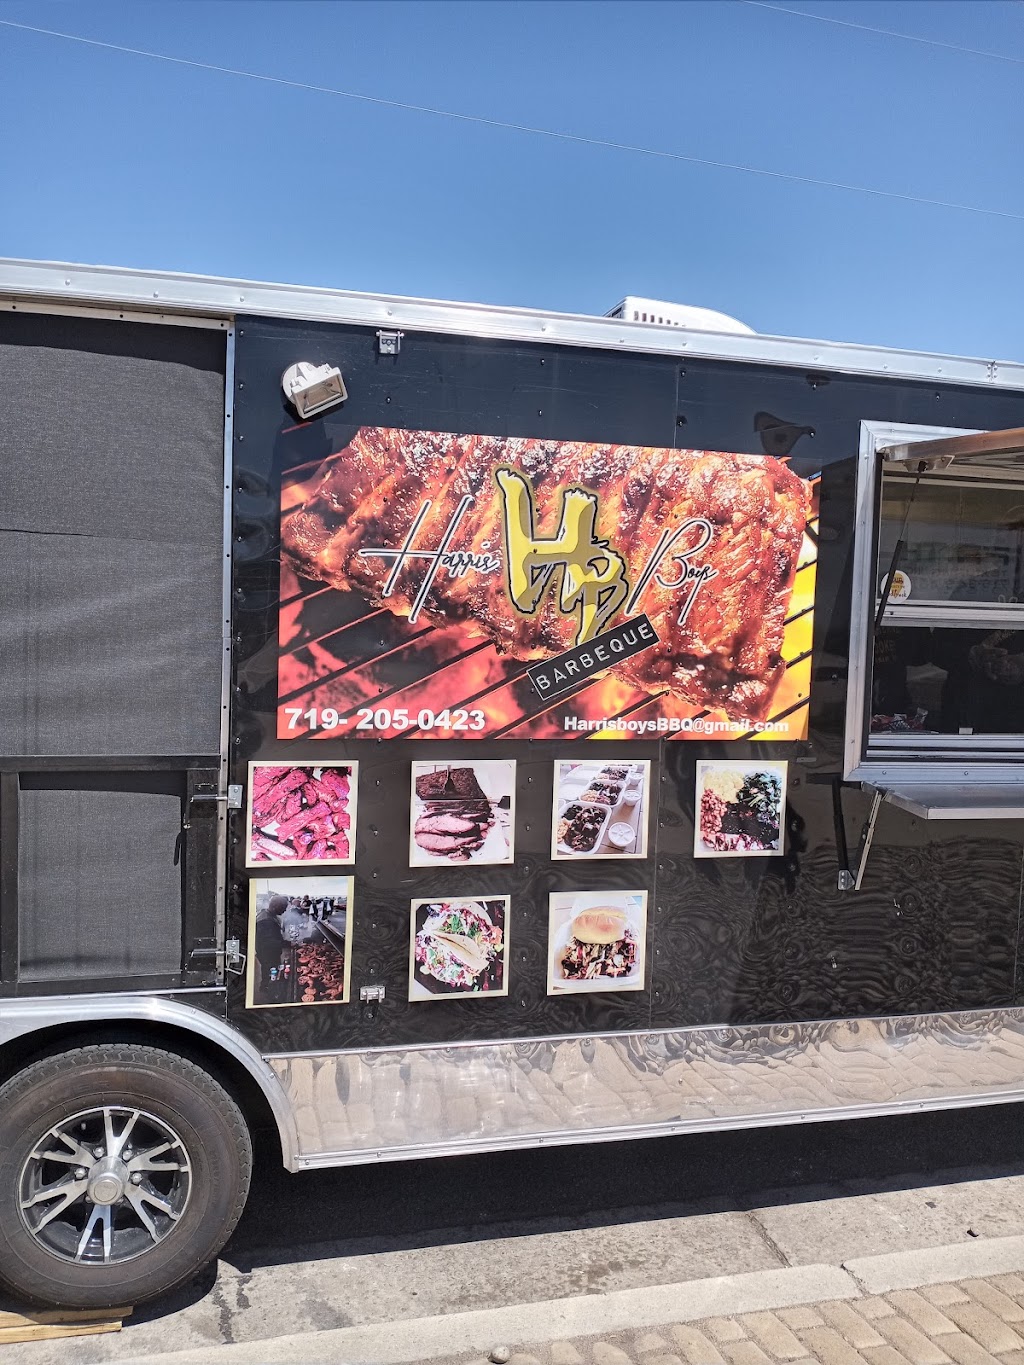 Harris Boys Barbecue | Mobile food truck, Fountain, CO 80817 | Phone: (719) 205-0423